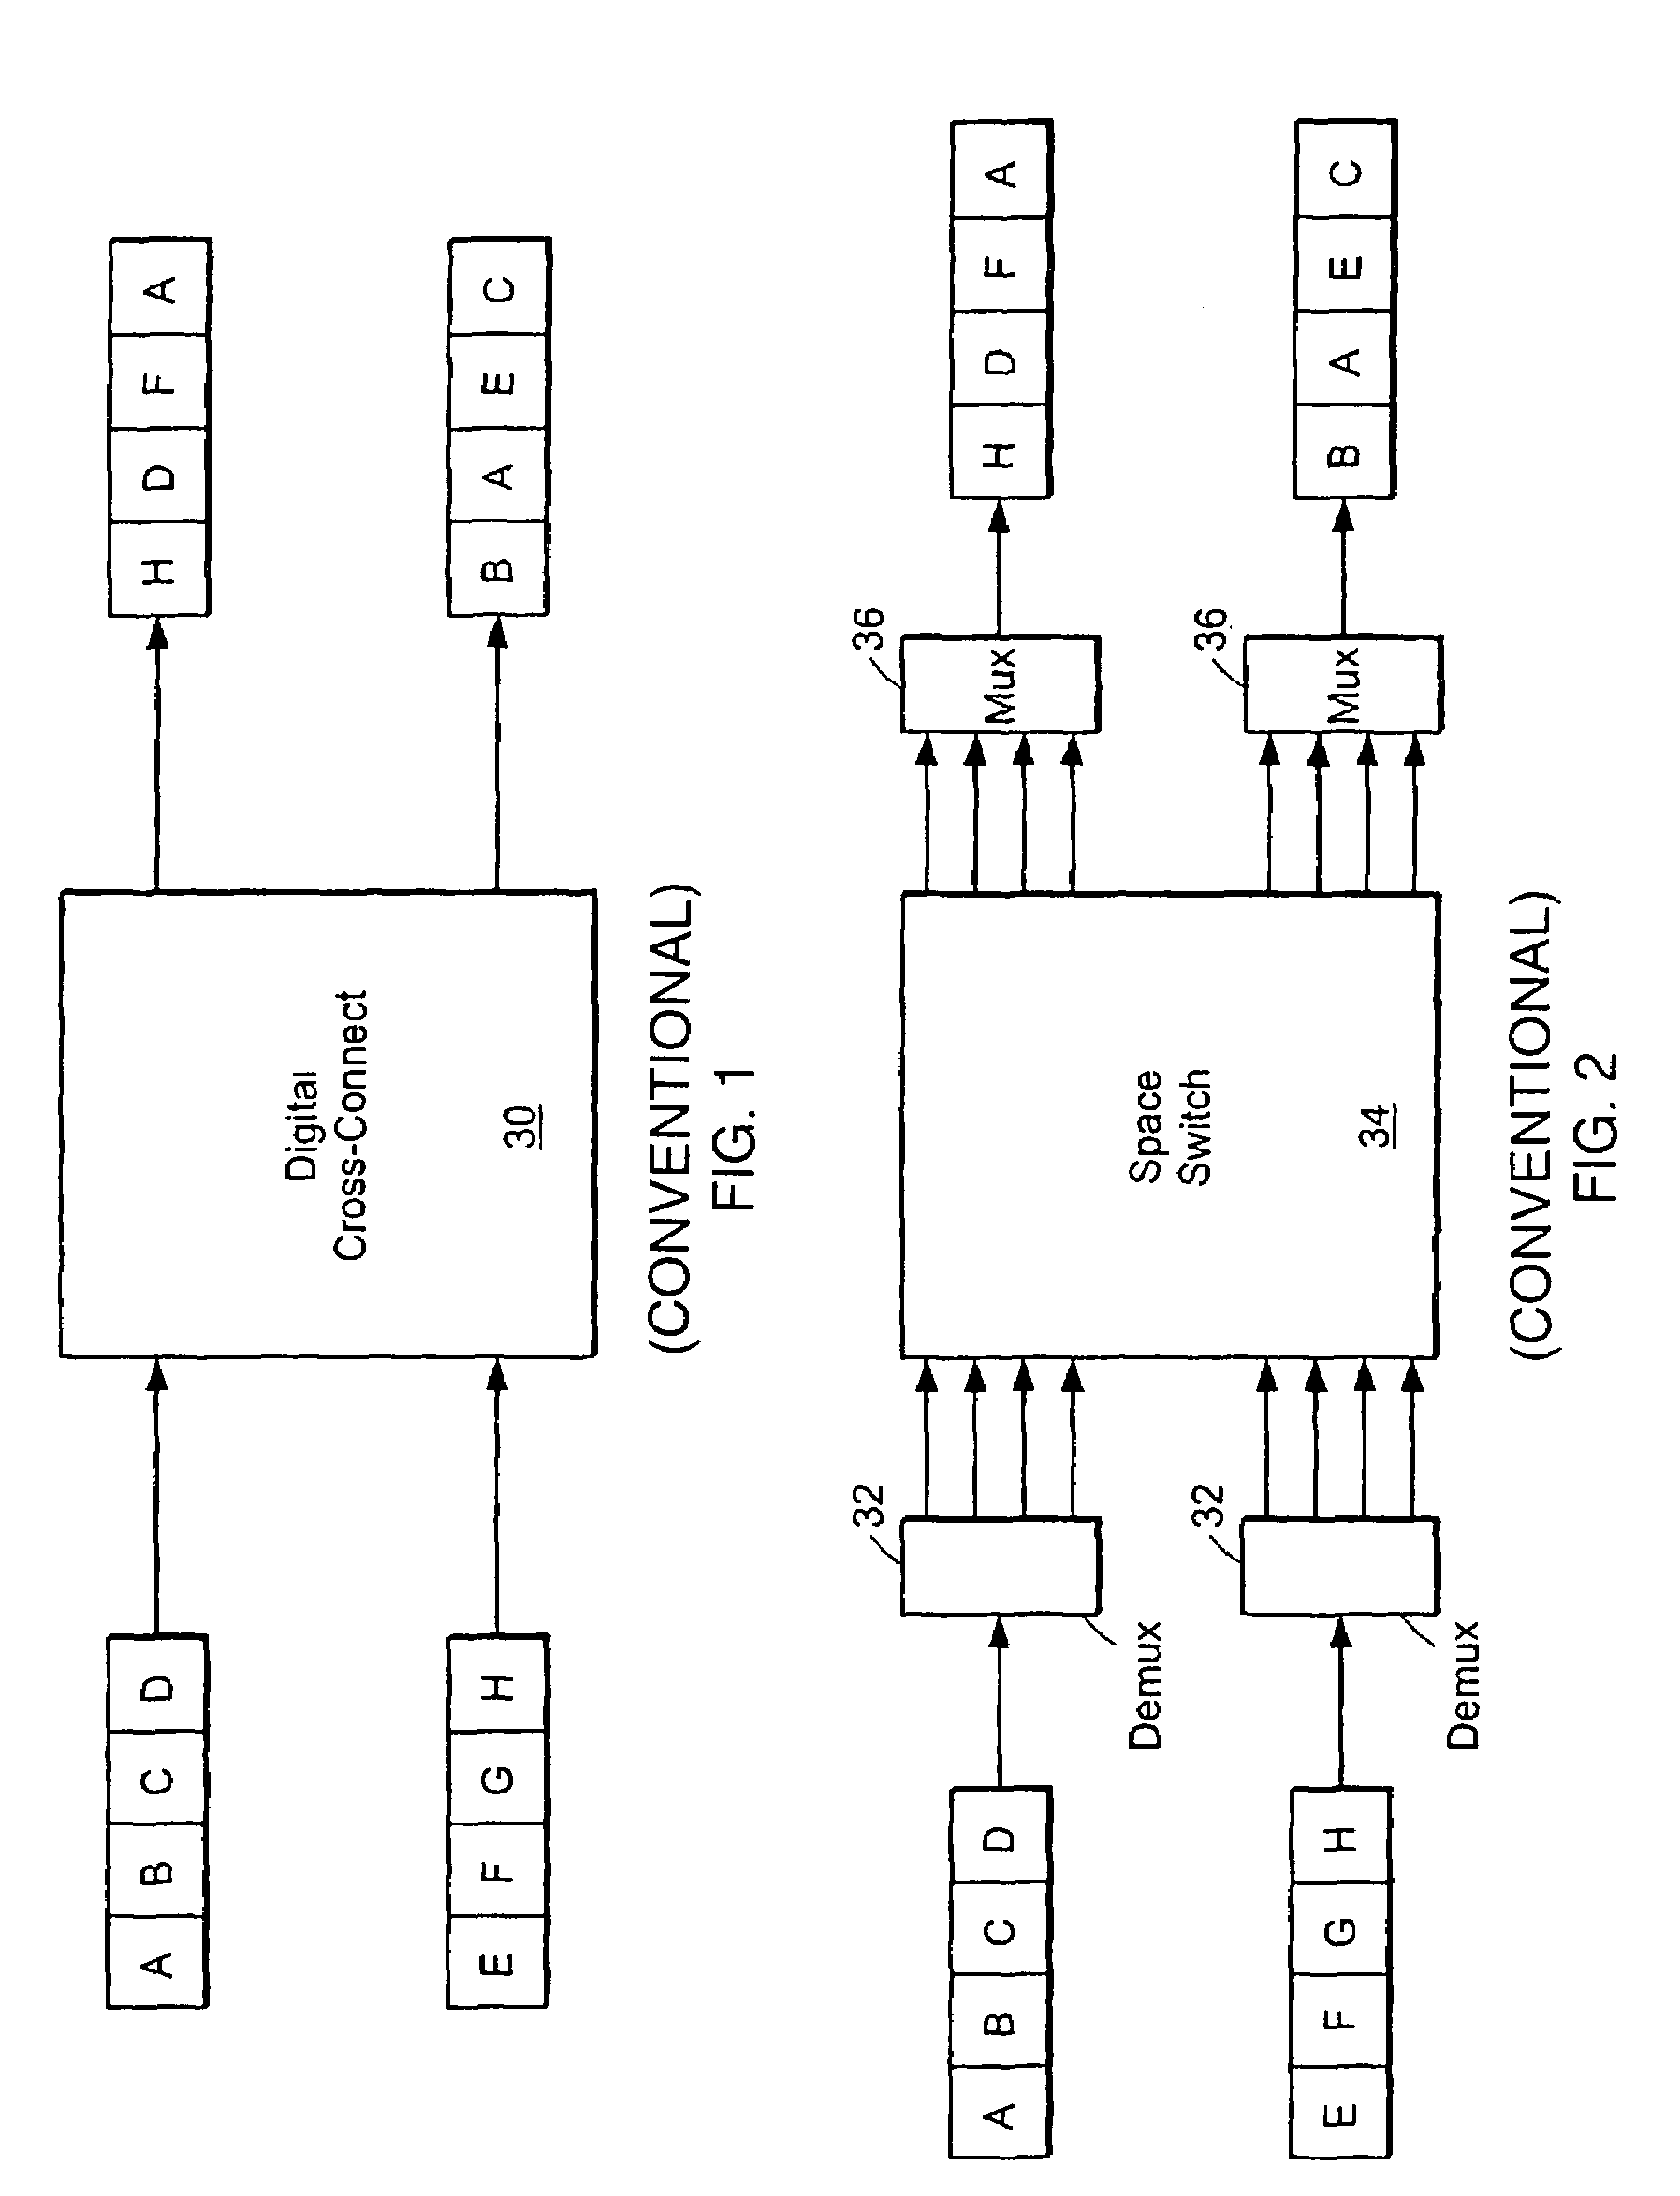 Scheduling connections in a multi-stage switch to retain non-blocking properties of constituent switching elements